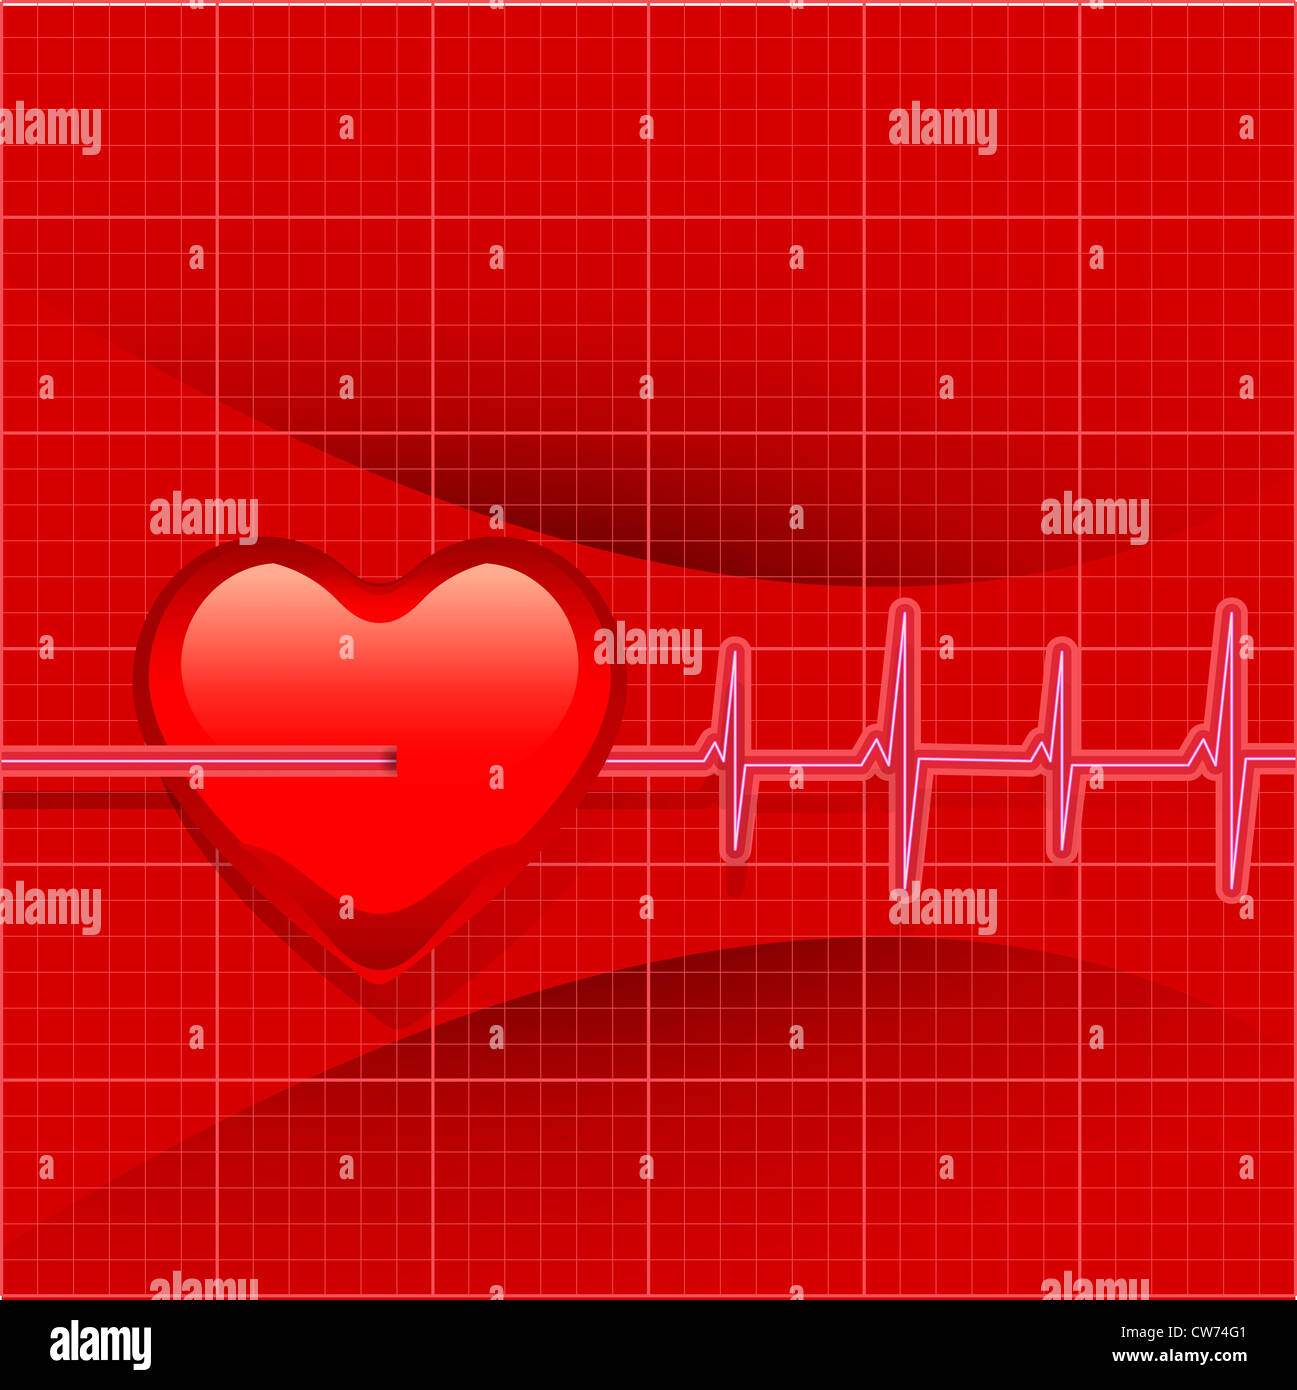 Heart Beats Cardiogram on Red background Stock Photo